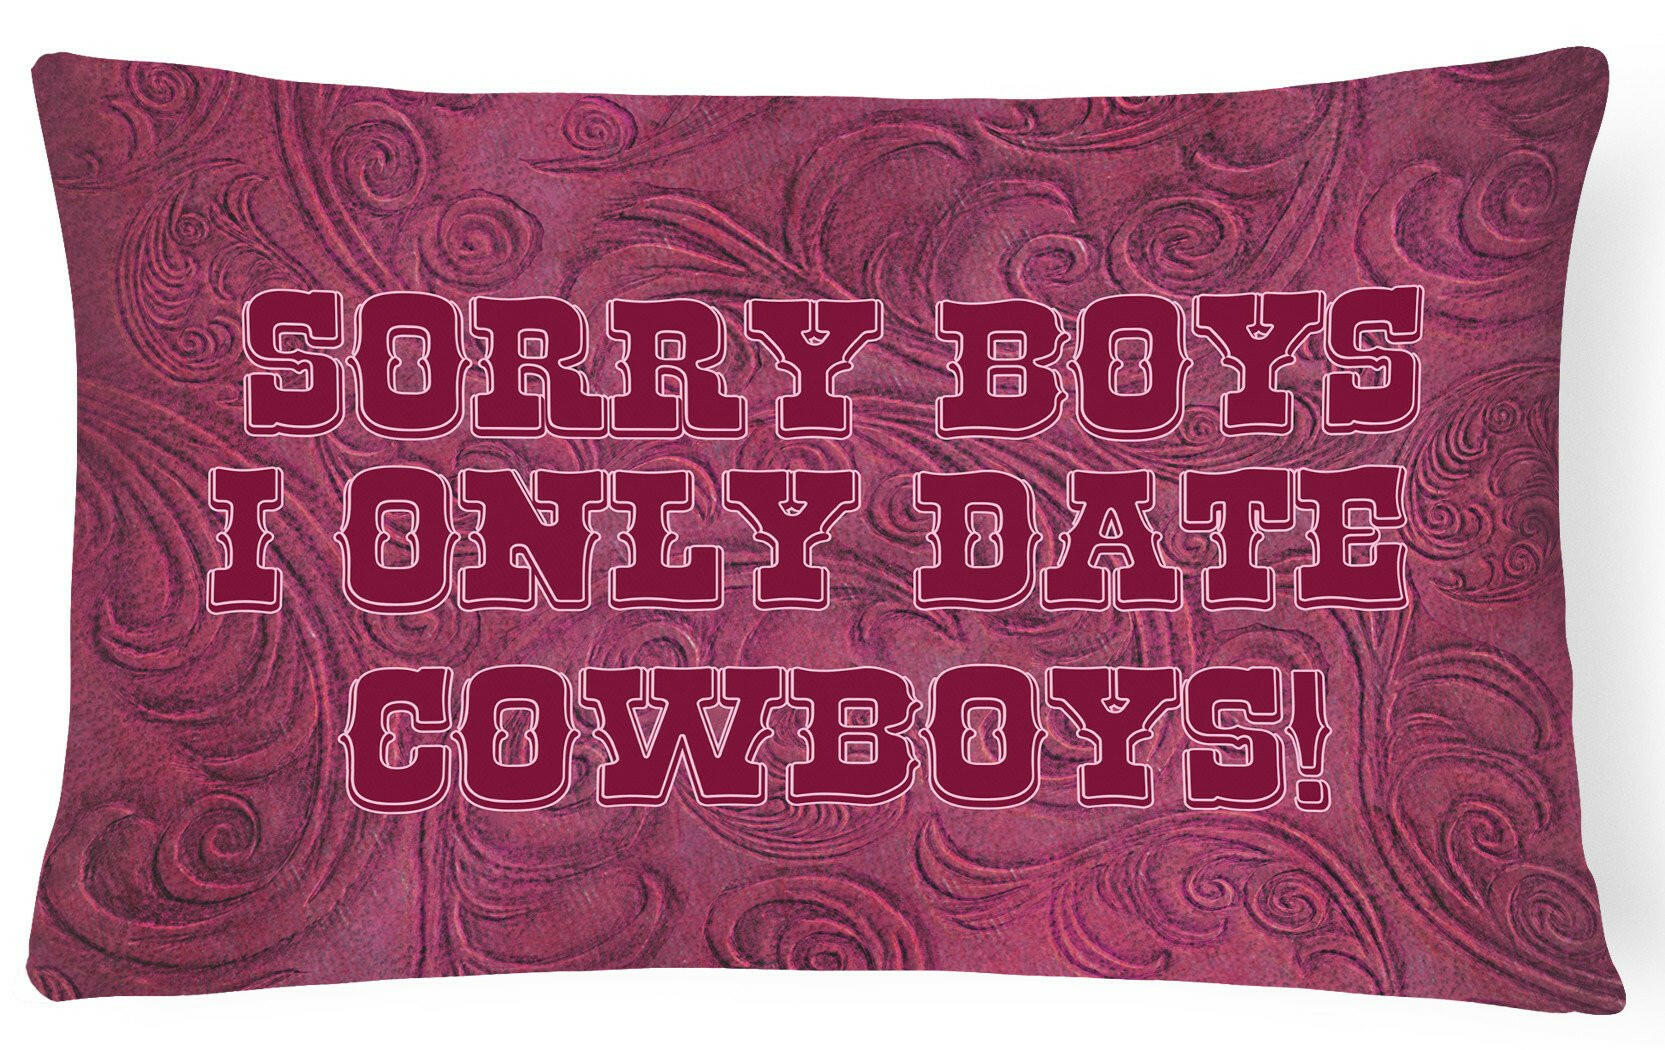 Sorry Boys I only date cowboys in pink   Canvas Fabric Decorative Pillow SB3062PW1216 by Caroline's Treasures